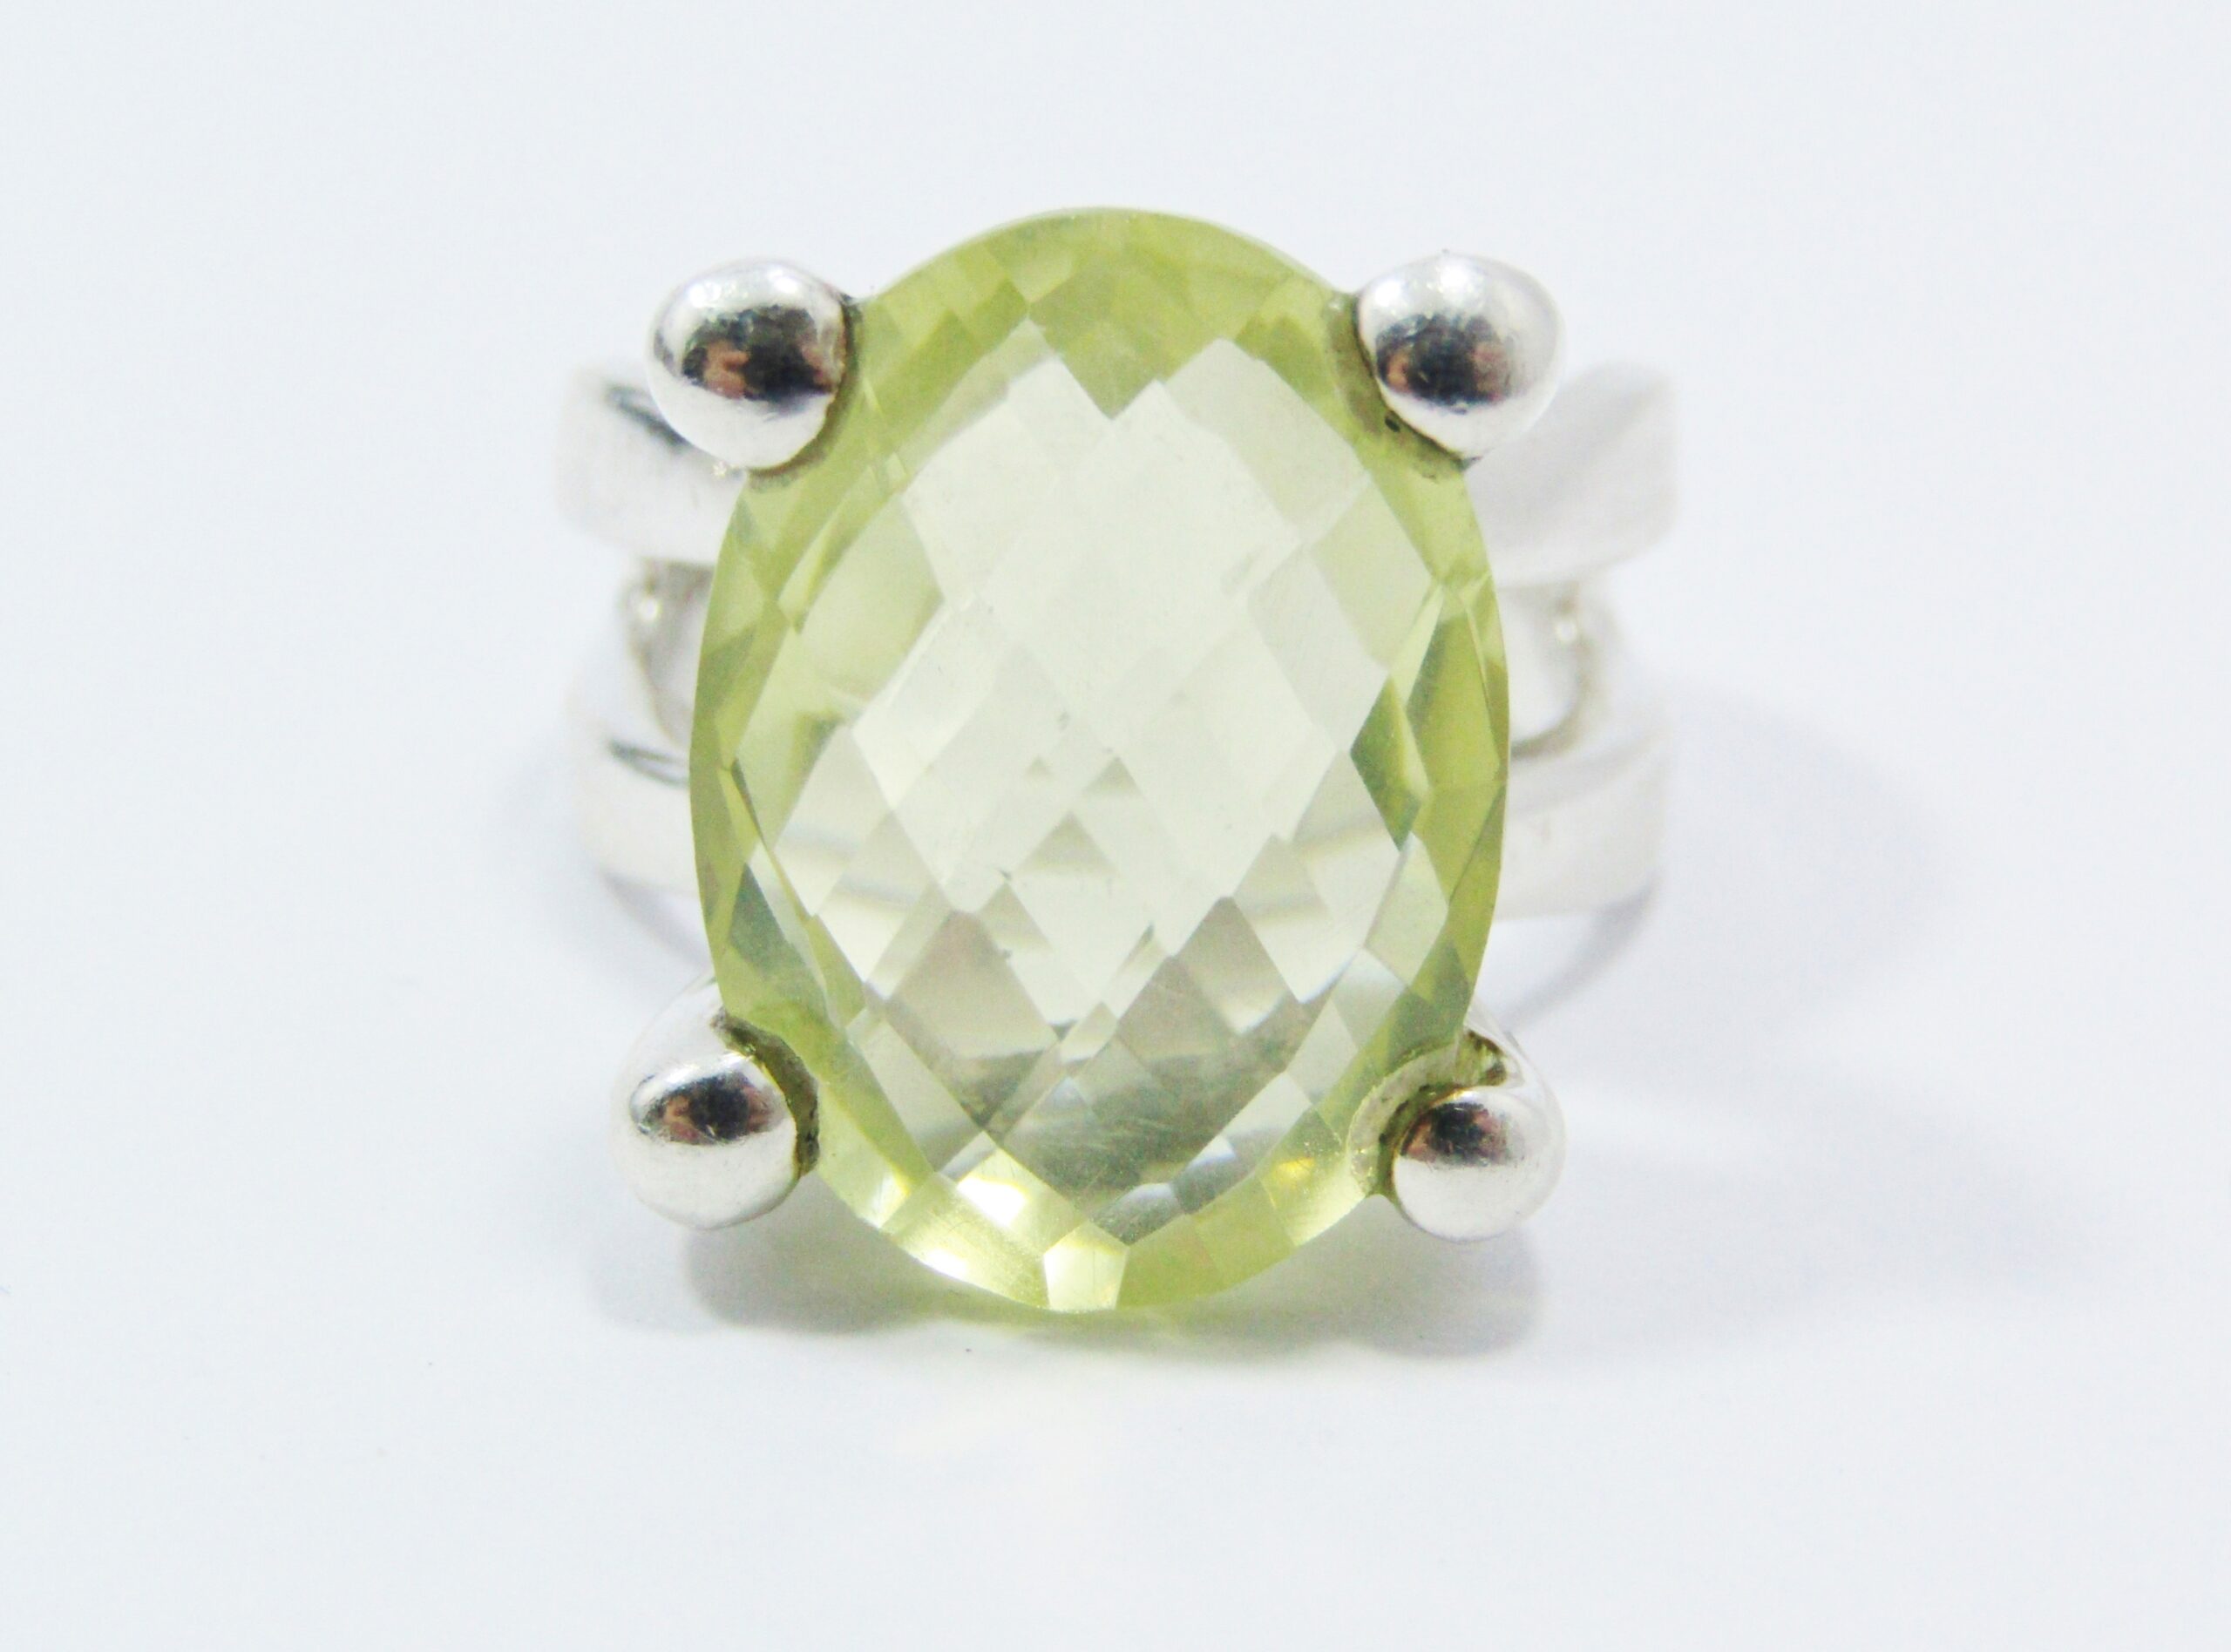 A Beautiful Radiant Lemon Quartz Solitaire Design Ring in Sterling Silver